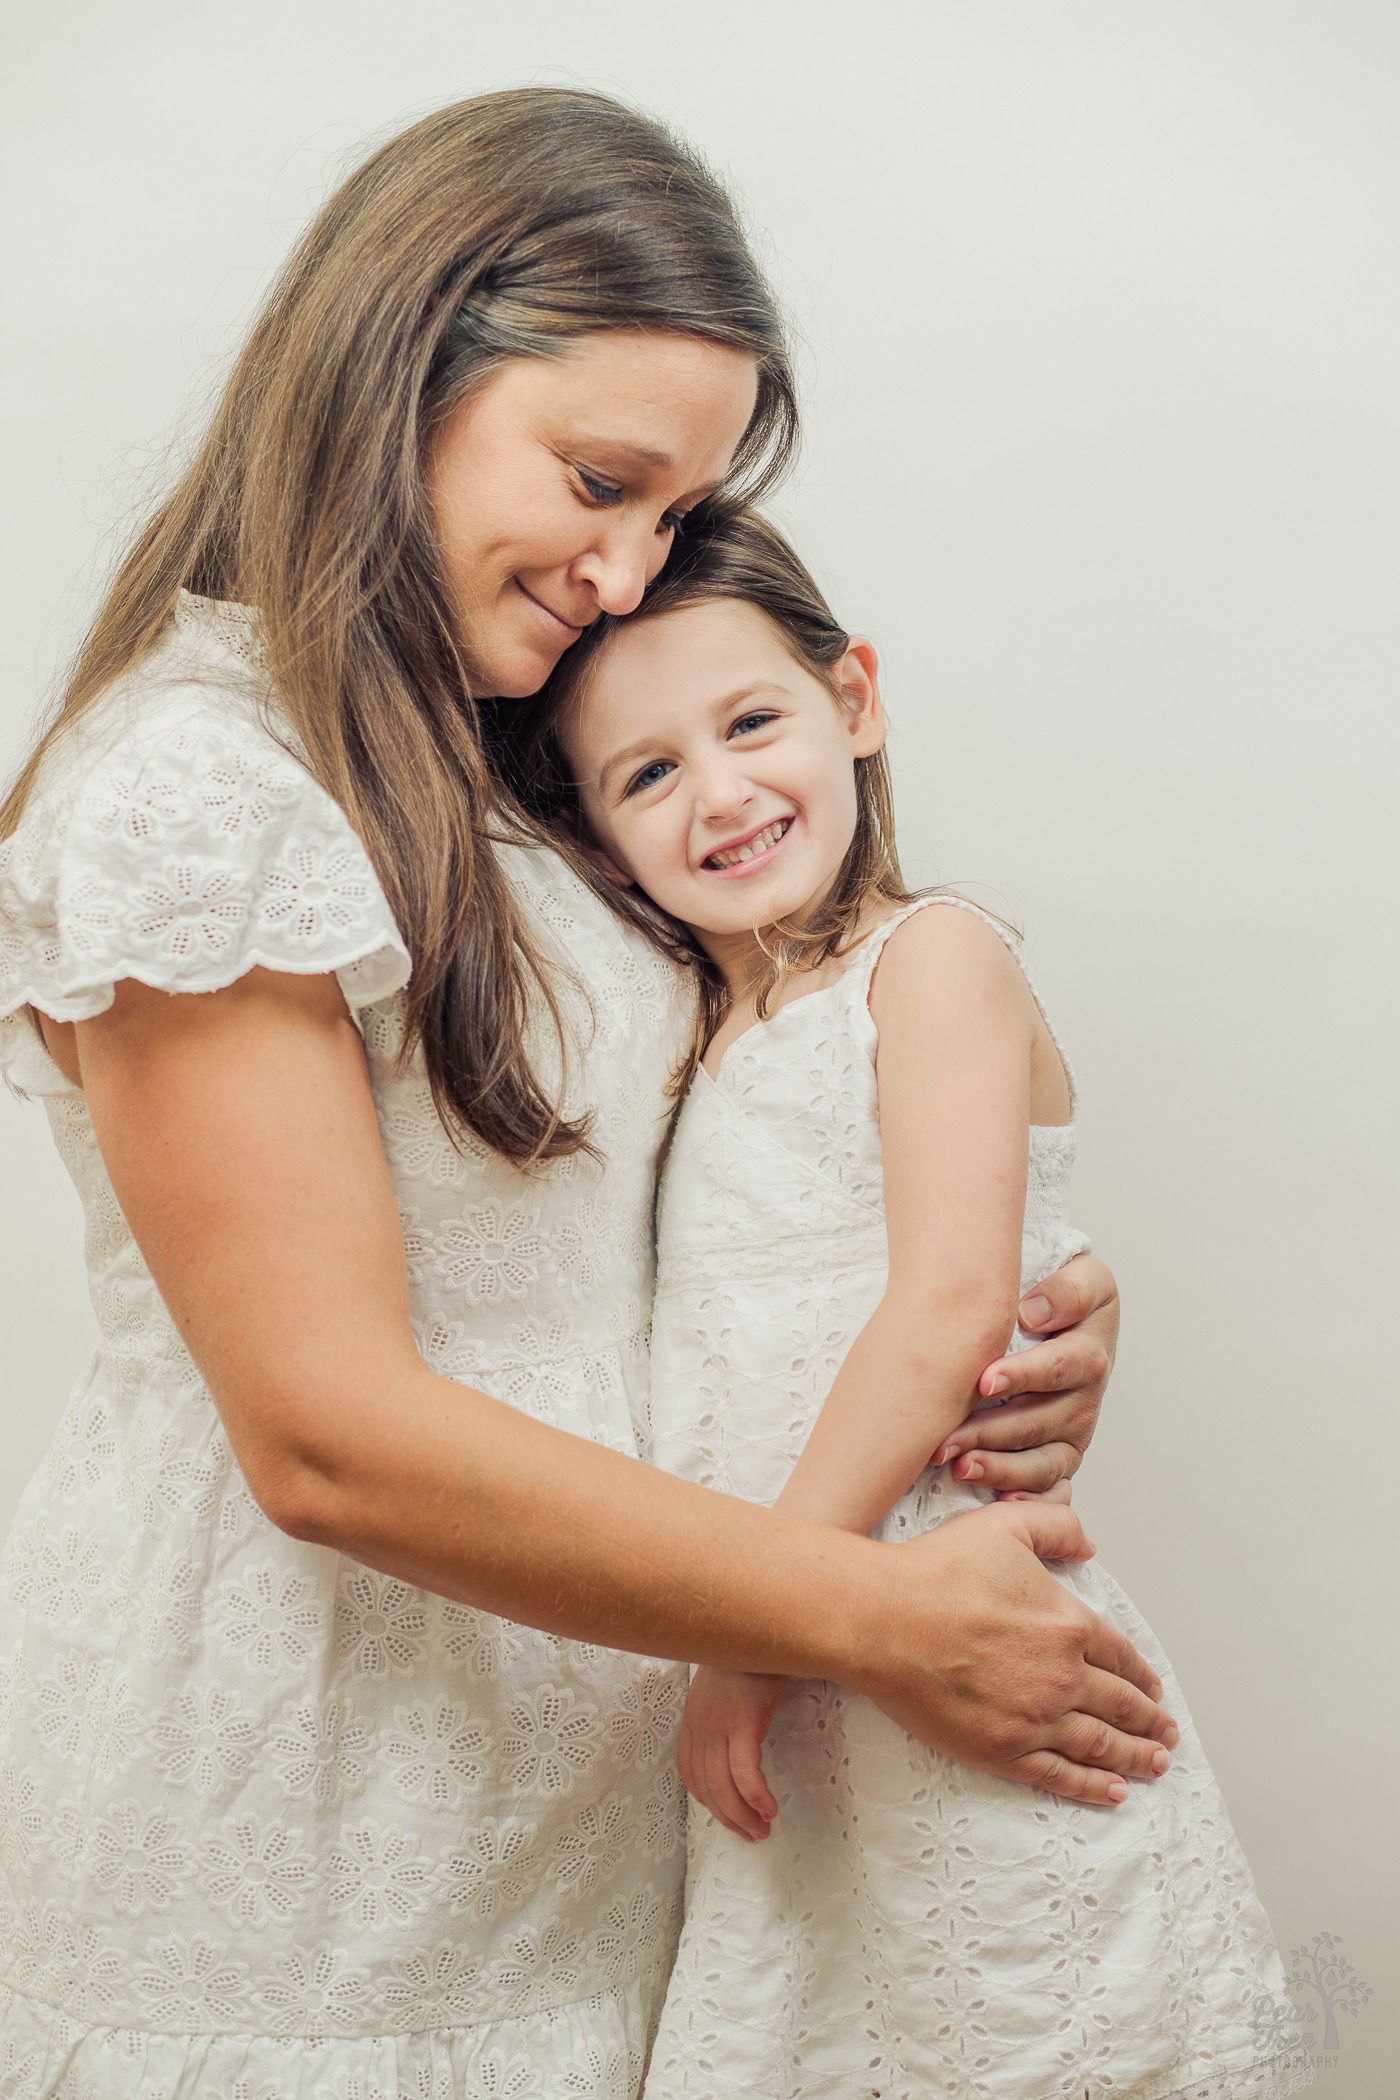 Mom and daughter hugging and smiling while wearing white lacy dresses